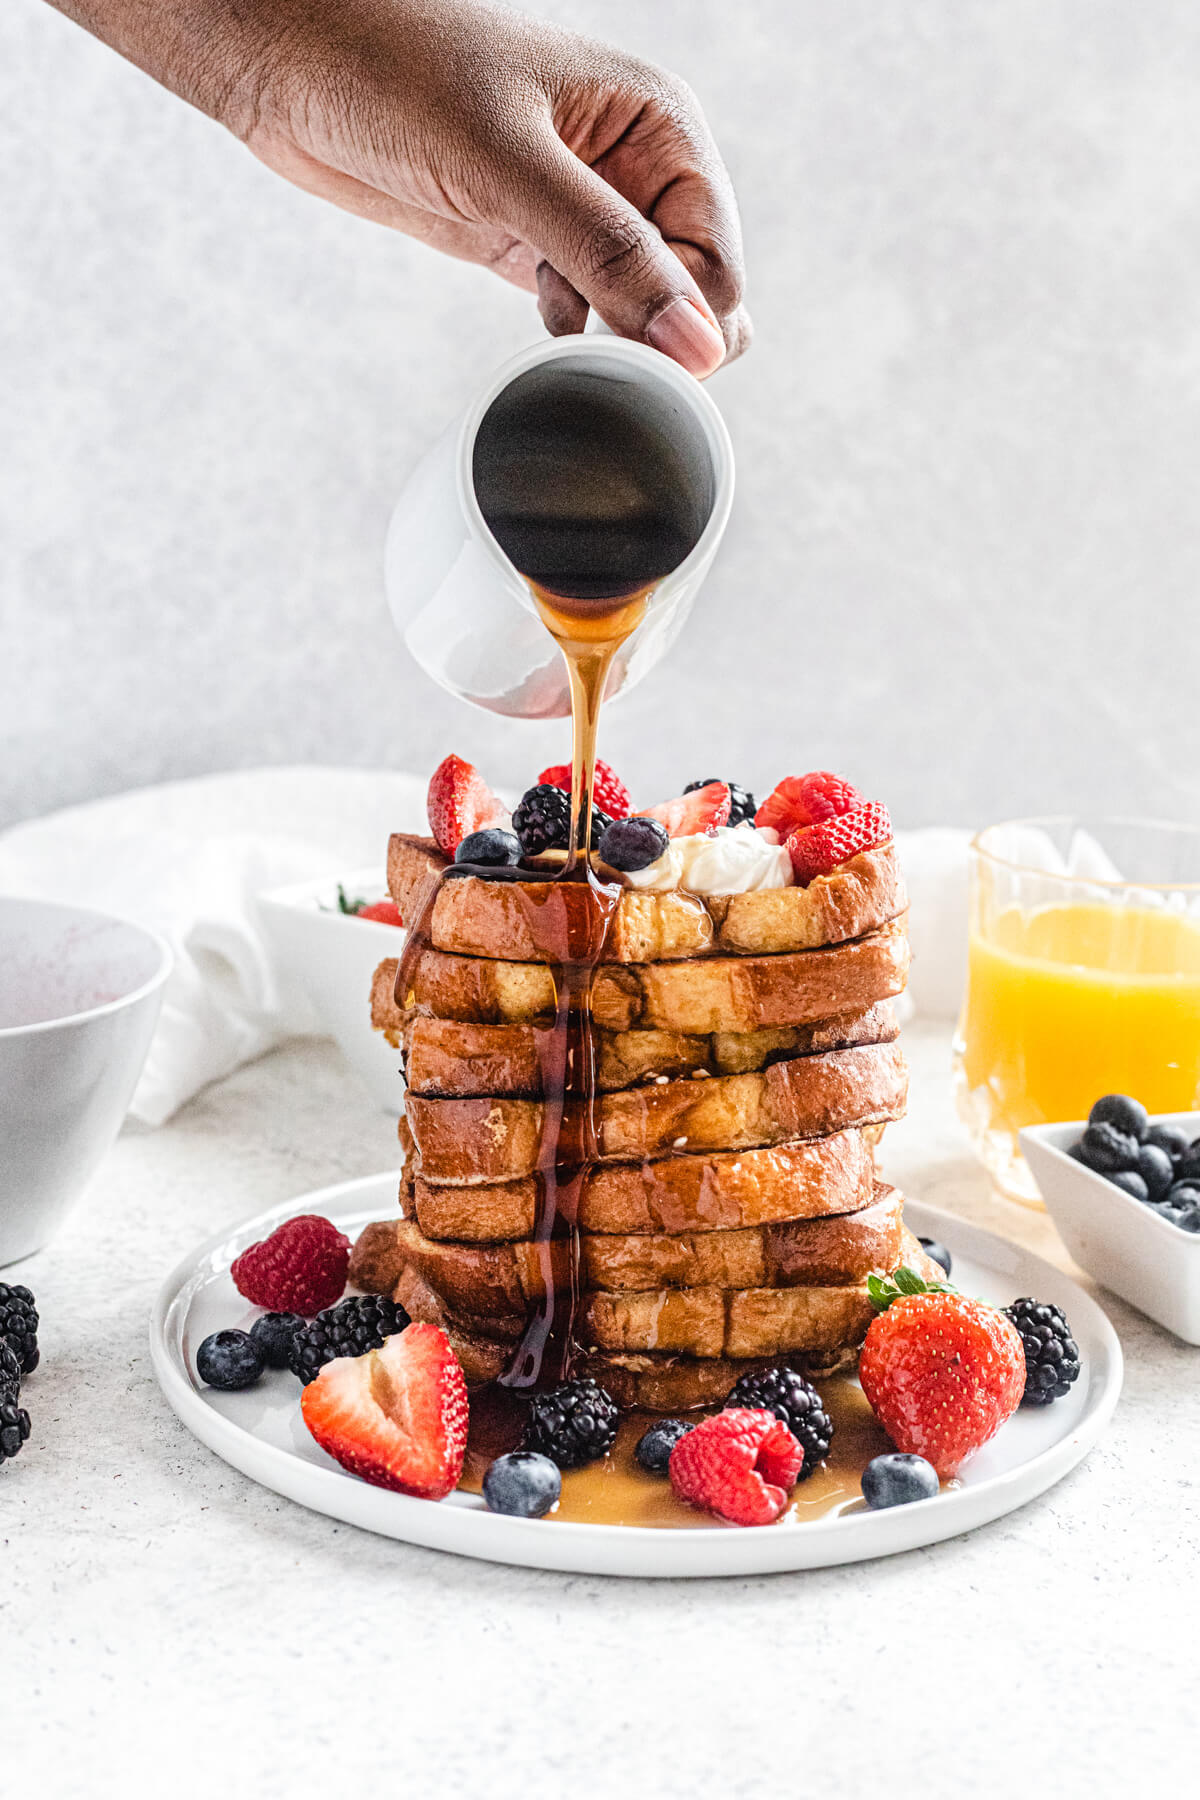 pouring maple syrup onto a tall stack of French toast topped with berries